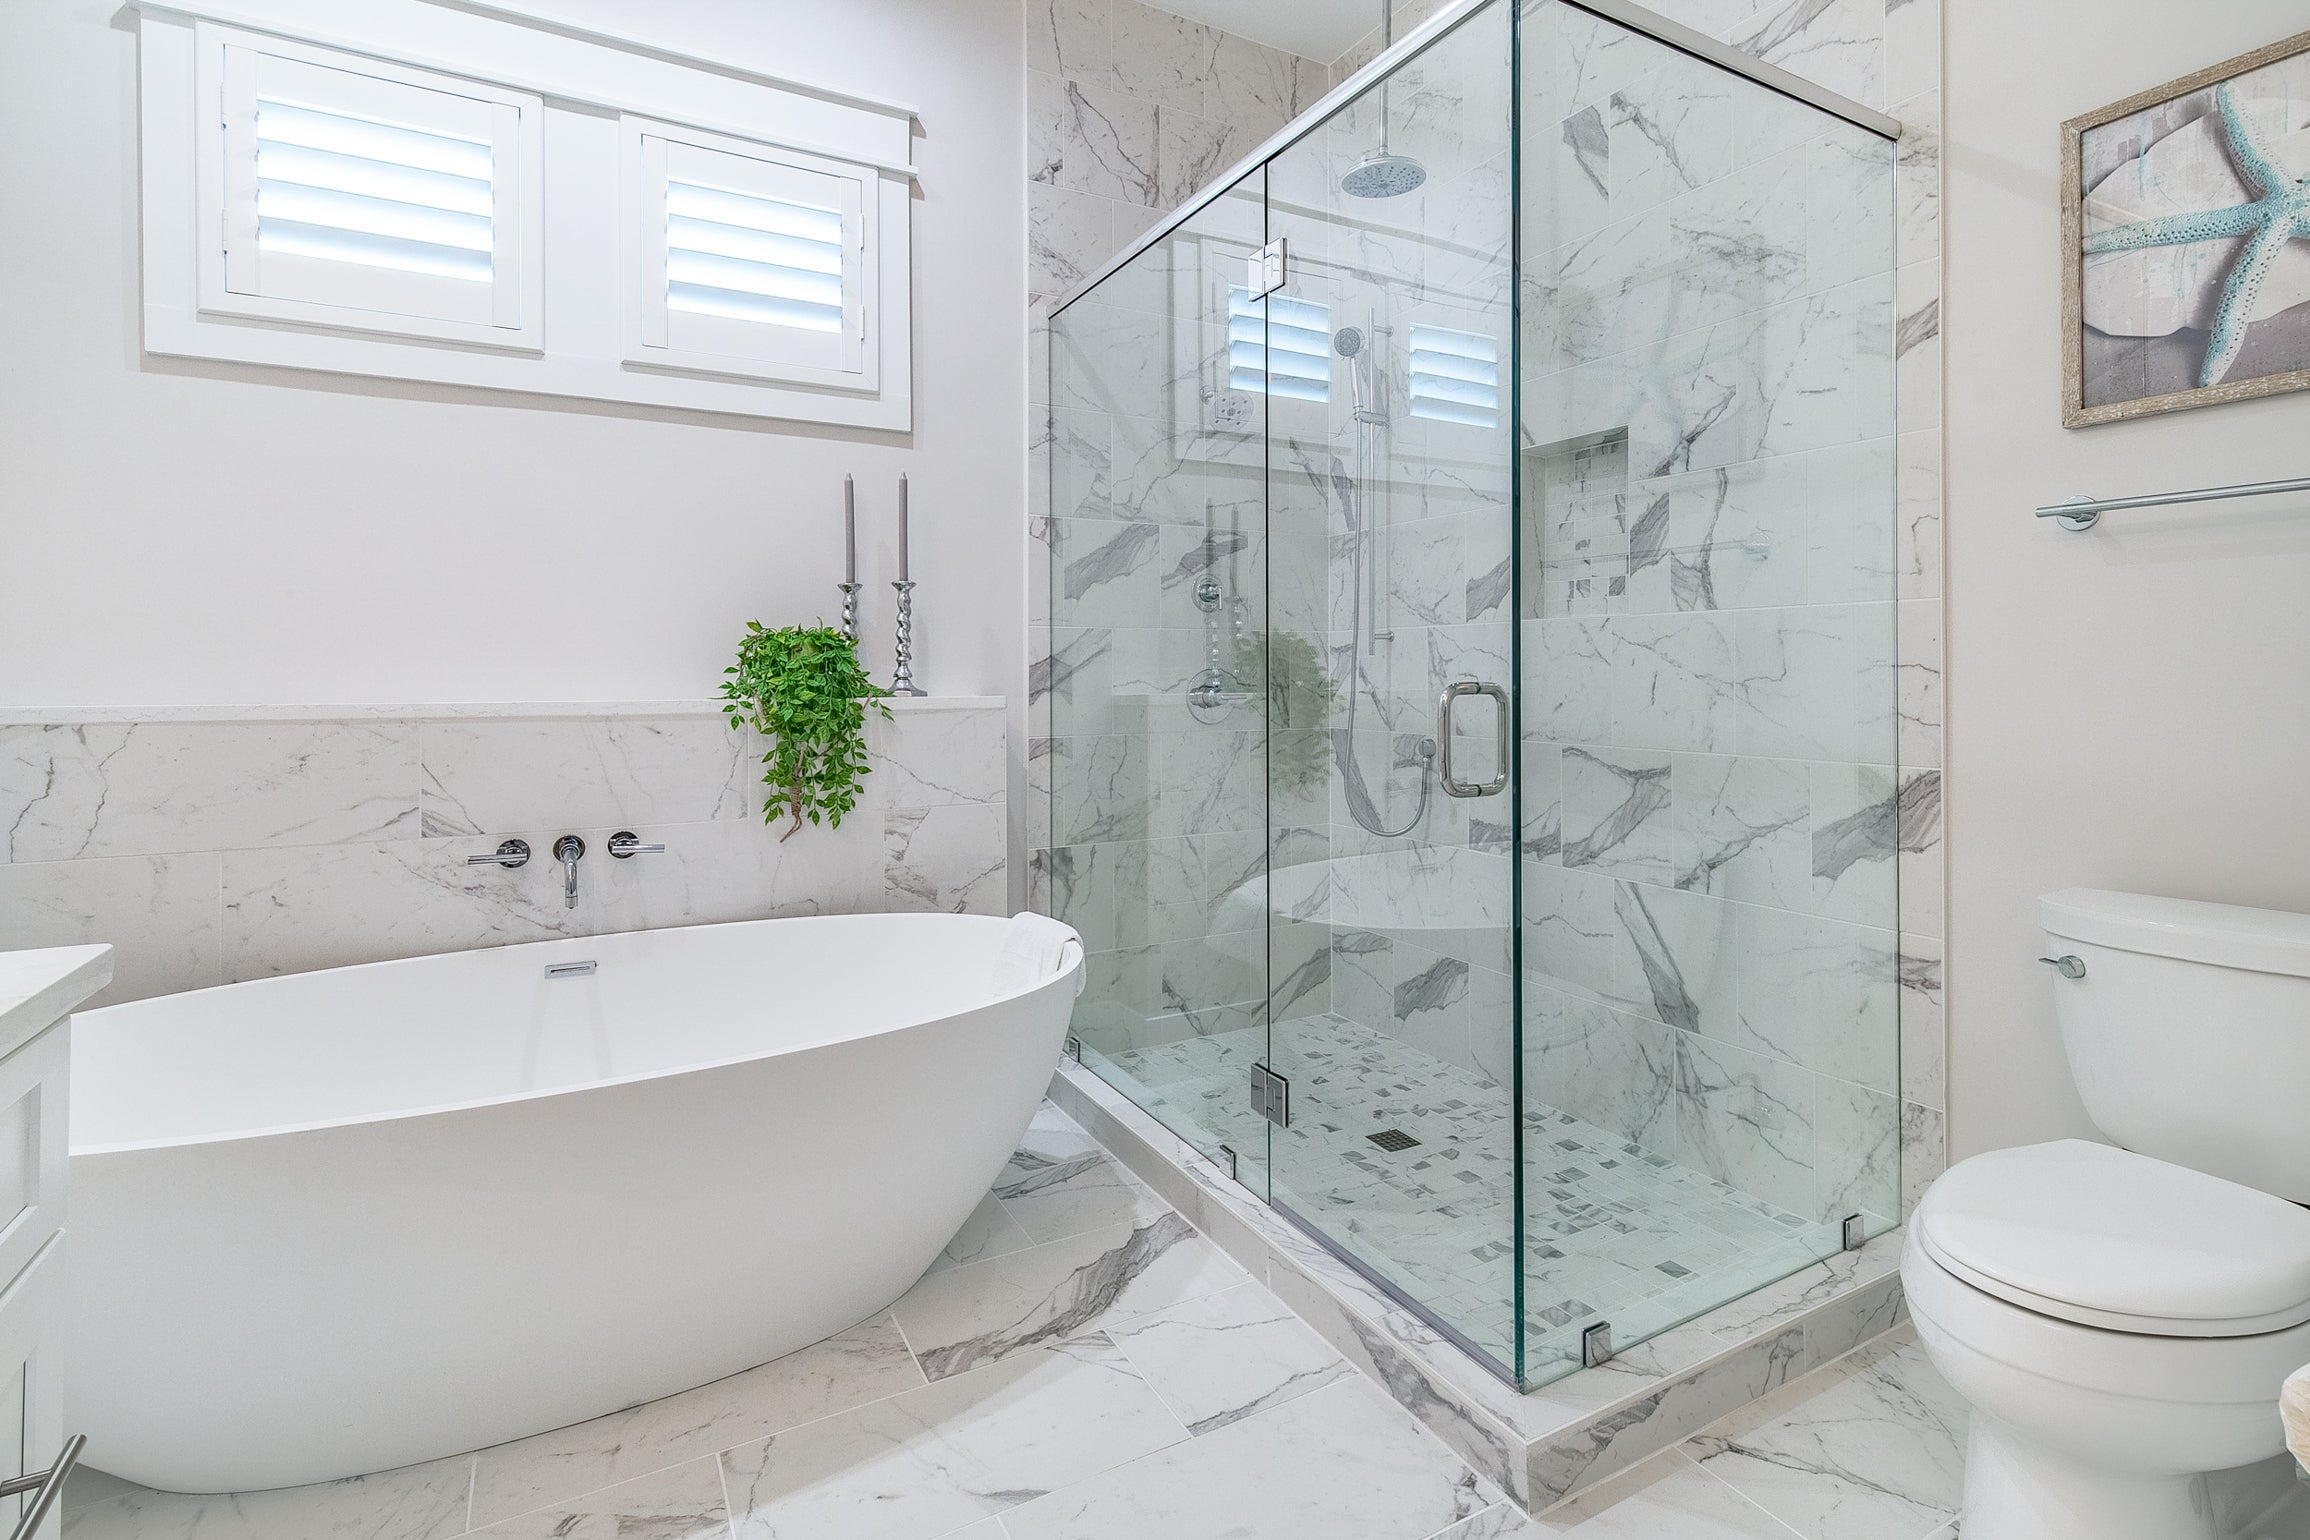 Soaking tub and glassed-in walk-in shower